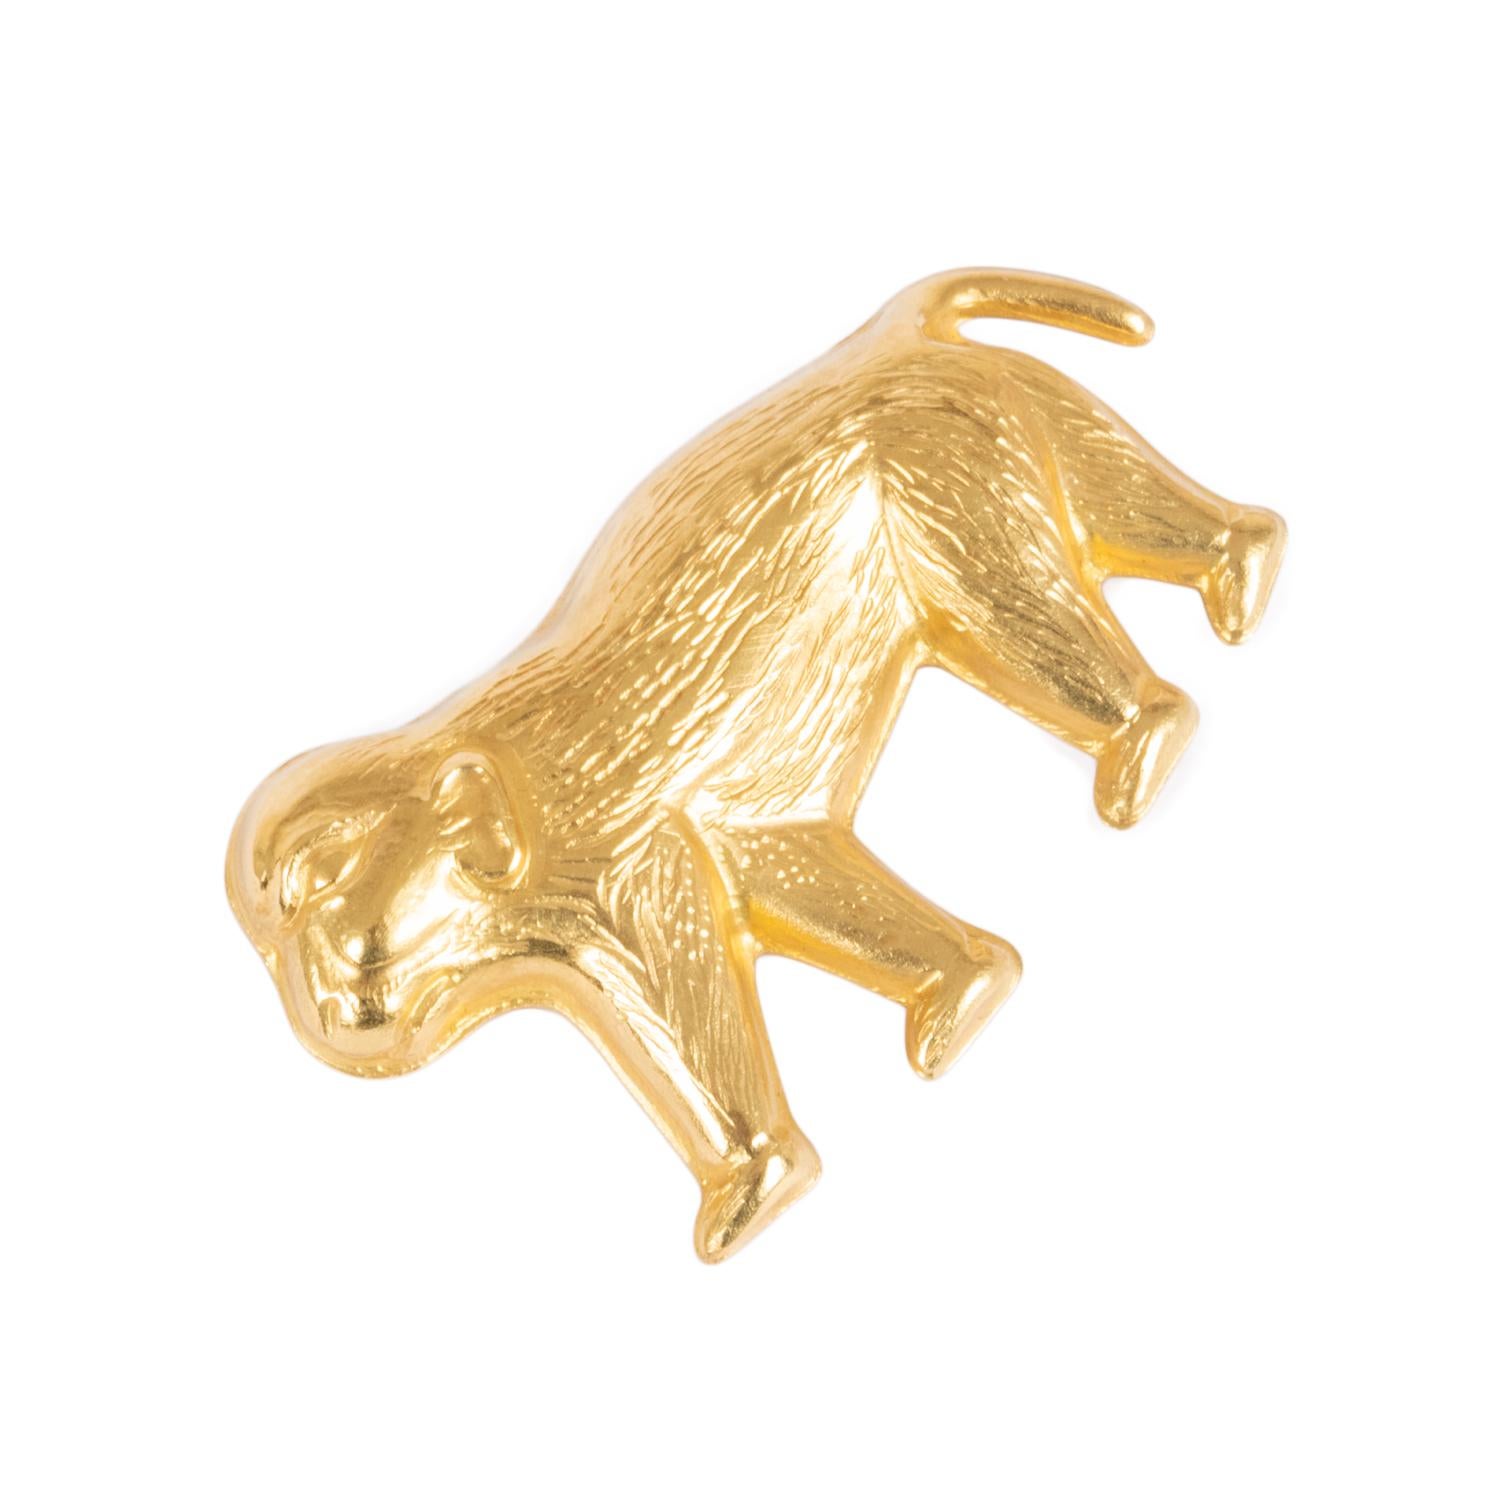 Beautiful Giancarlo Montebello.  18 K Gold monkey brooch, perfect for everyday wear.
